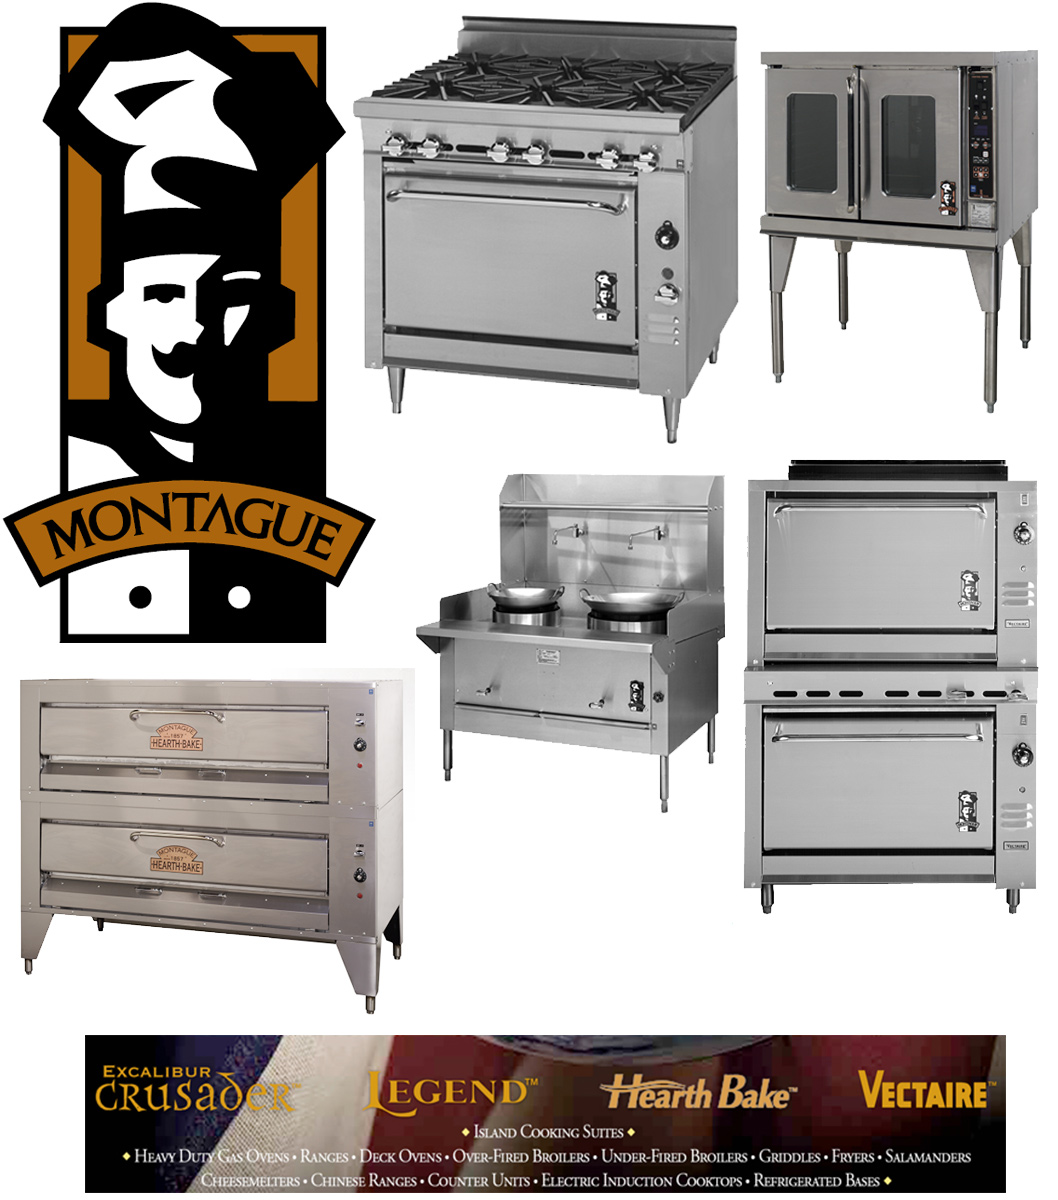 Montague Stoves and Ranges, Professional Commercial Kitchen Equipment since the 1800s